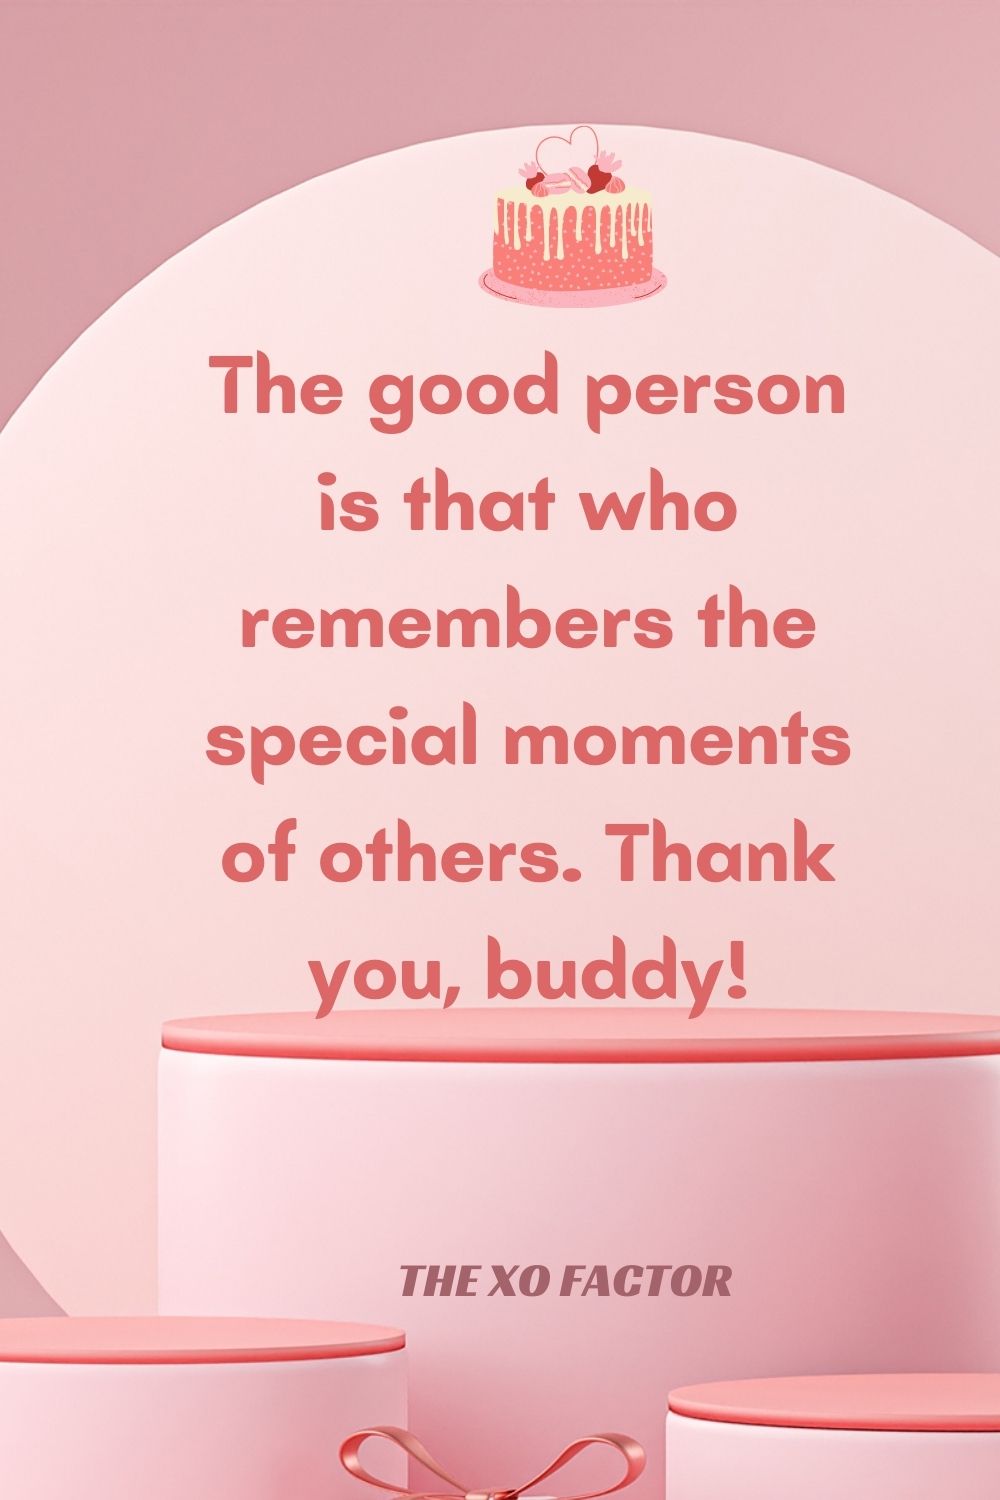 The good person is that who remembers the special moments of others. Thank you, buddy!